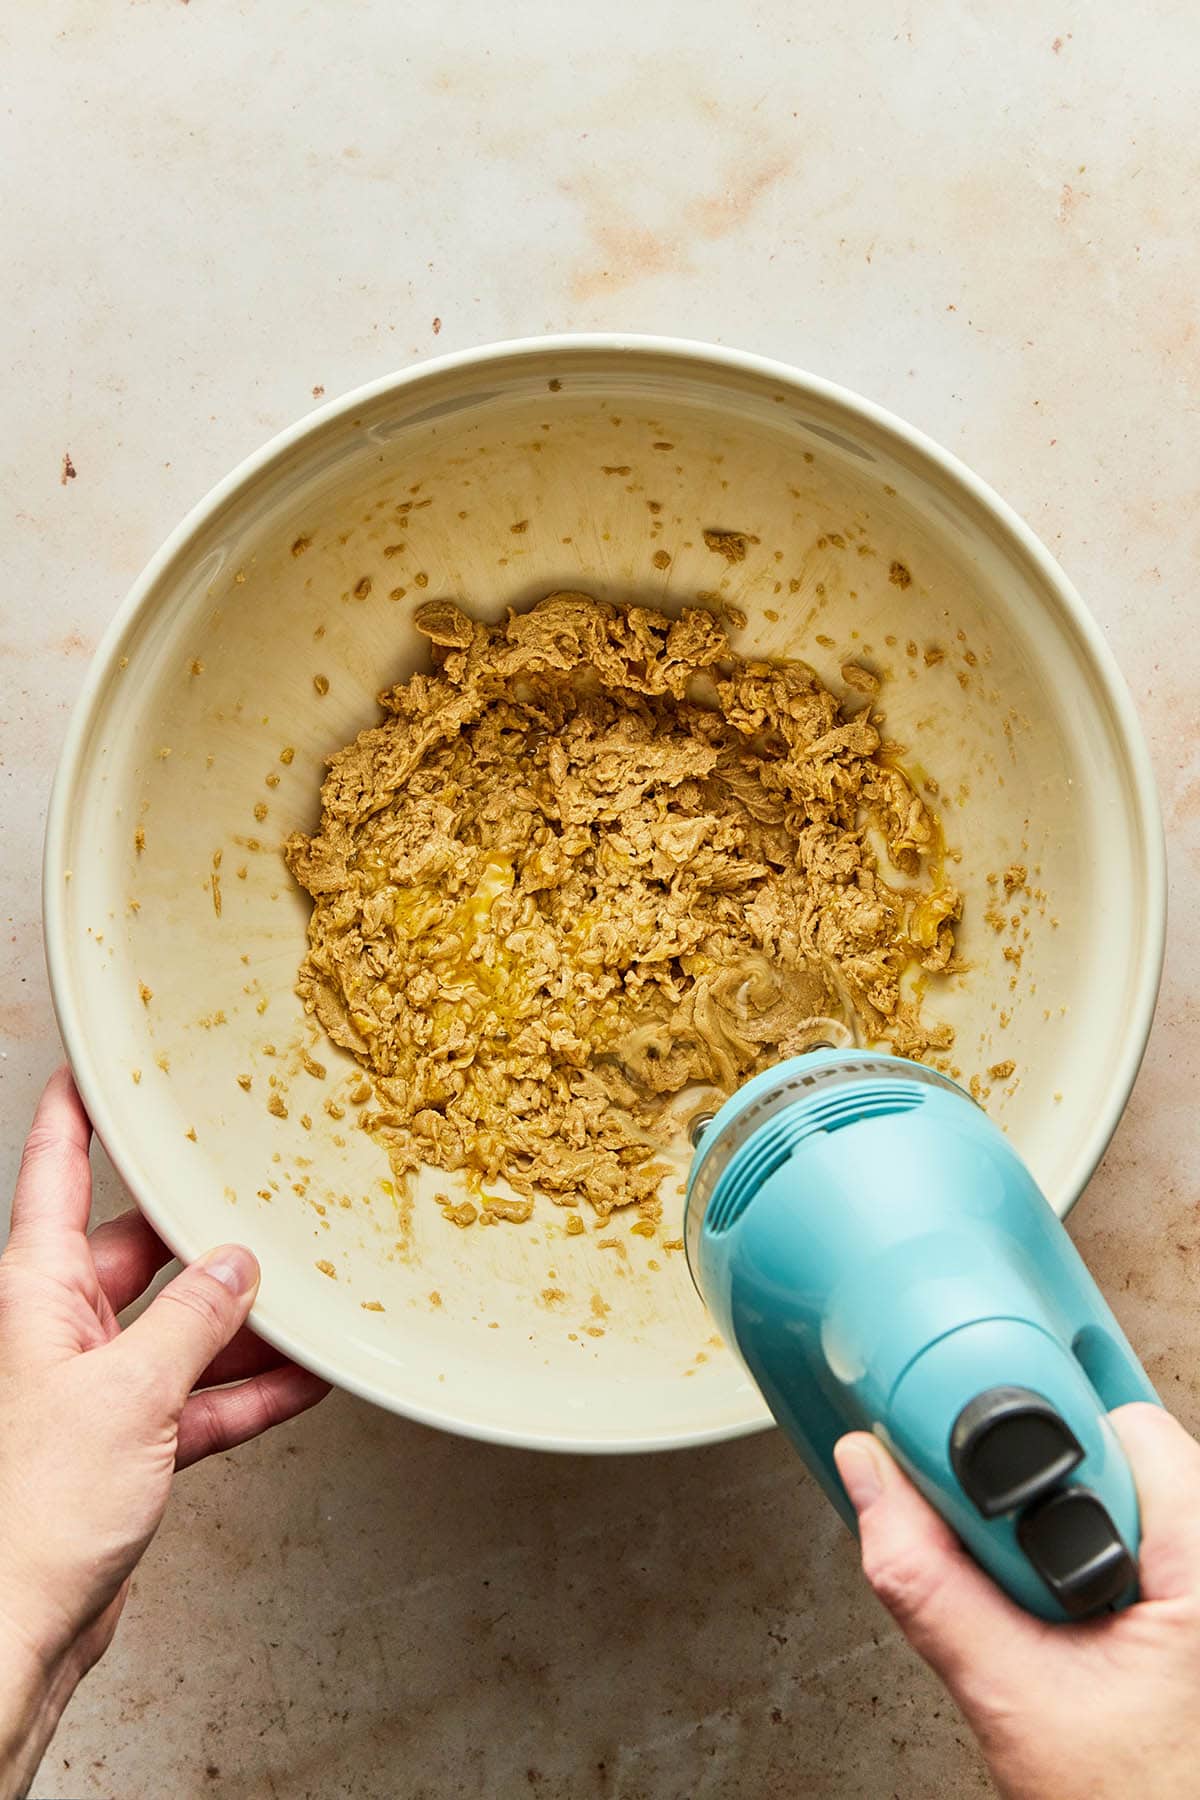 A hand using a hand mixer to mix an egg into wet muffin ingredients.